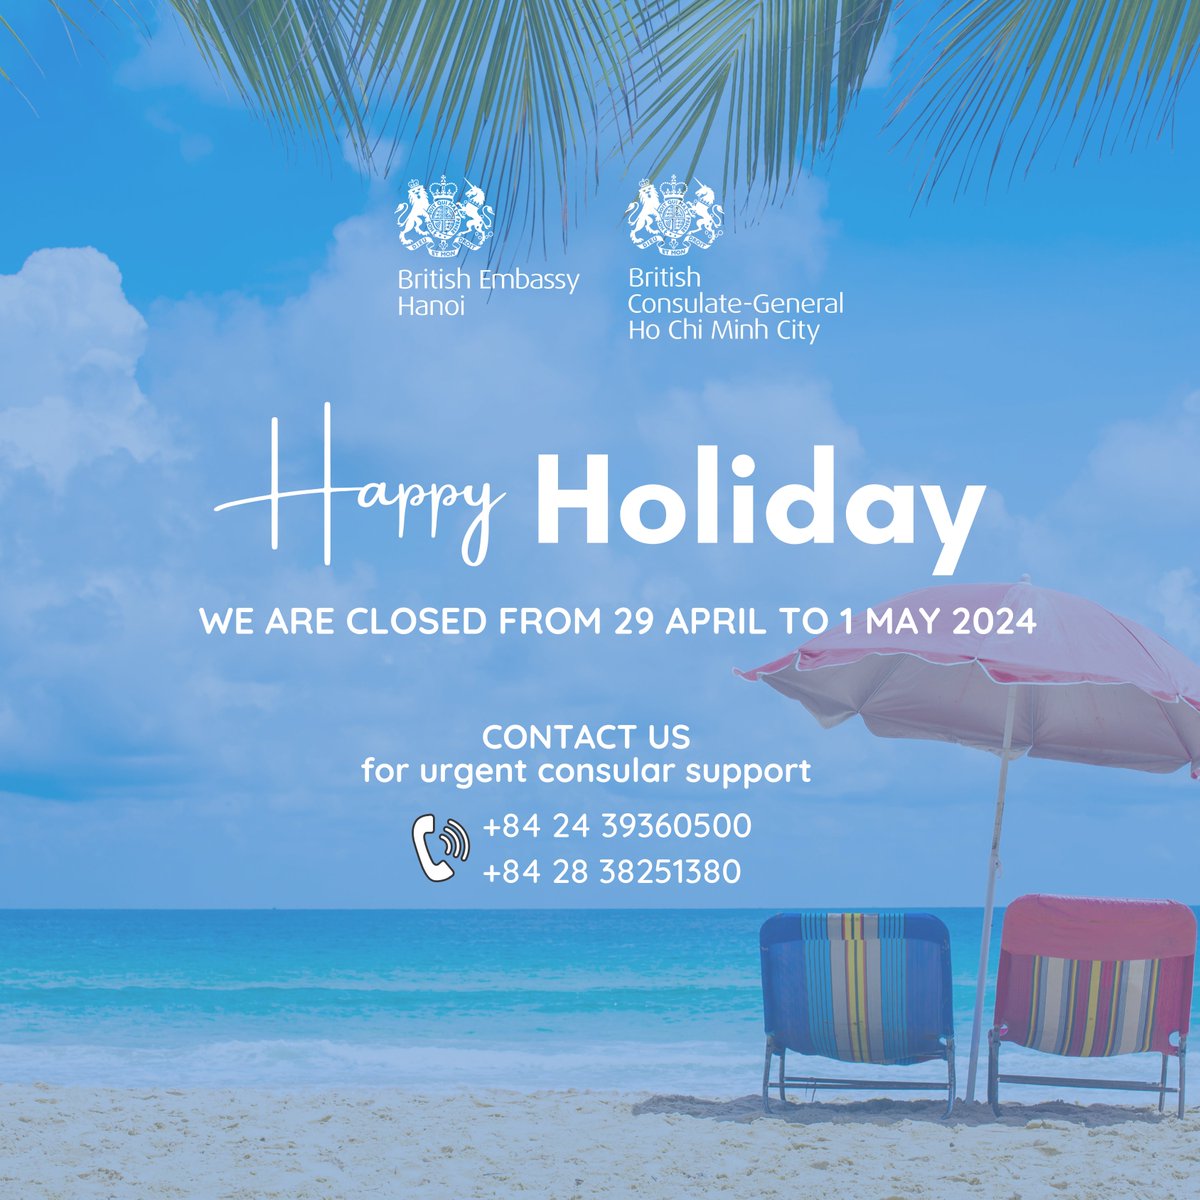 Please be reminded that our offices in Hanoi and Ho Chi Minh City are closed from 29 April to 1 May 2024. We will be open on Thursday 02 May 2024. >> For urgent Consular support, please contact the 24/7 hotline: +84 24 39360500 or +84 28 38251380.